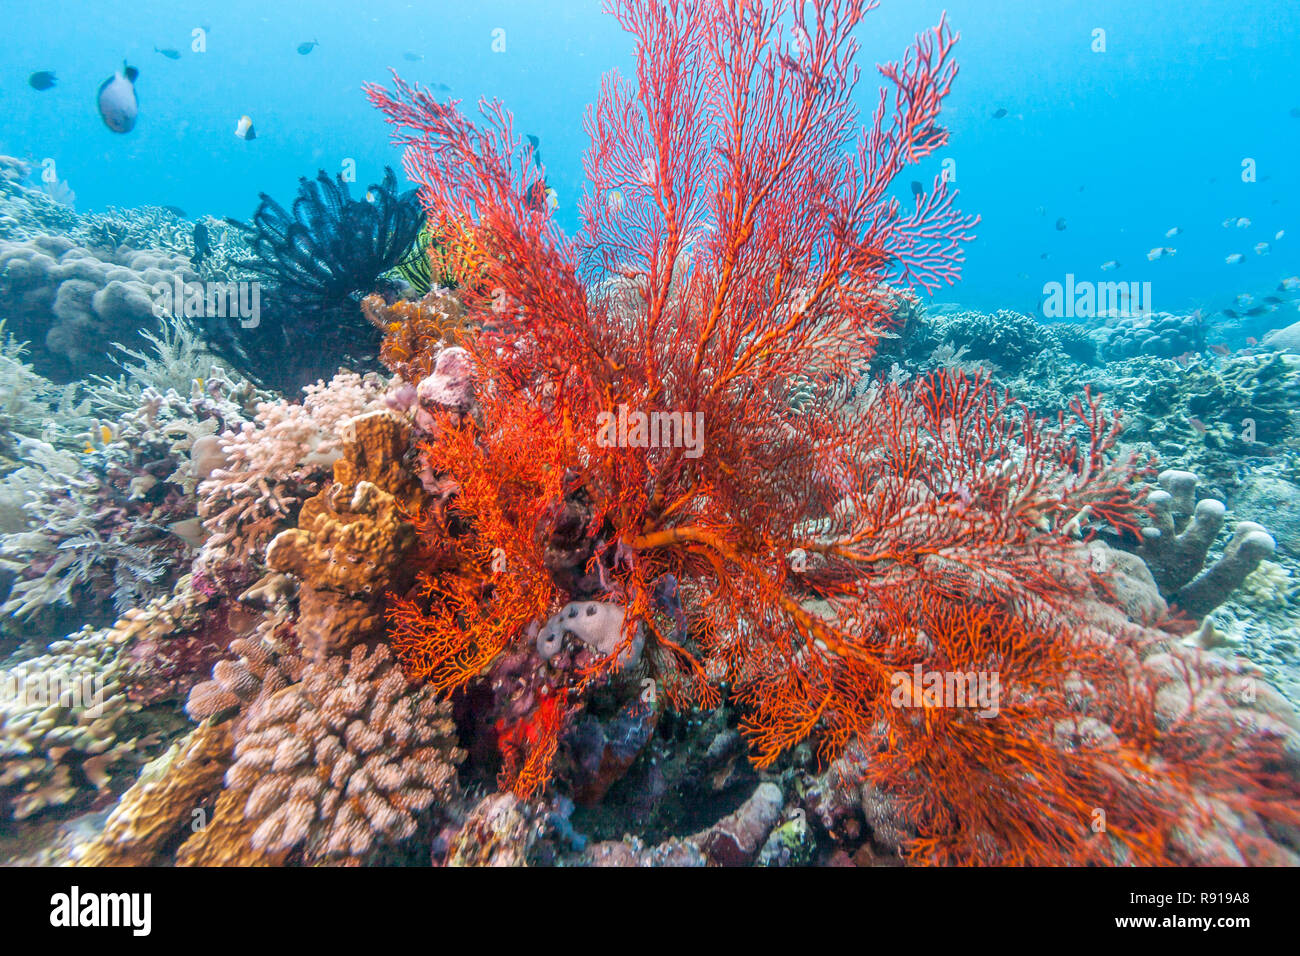 Coral reef off the Coast of Bali Indonesia Stock Photo